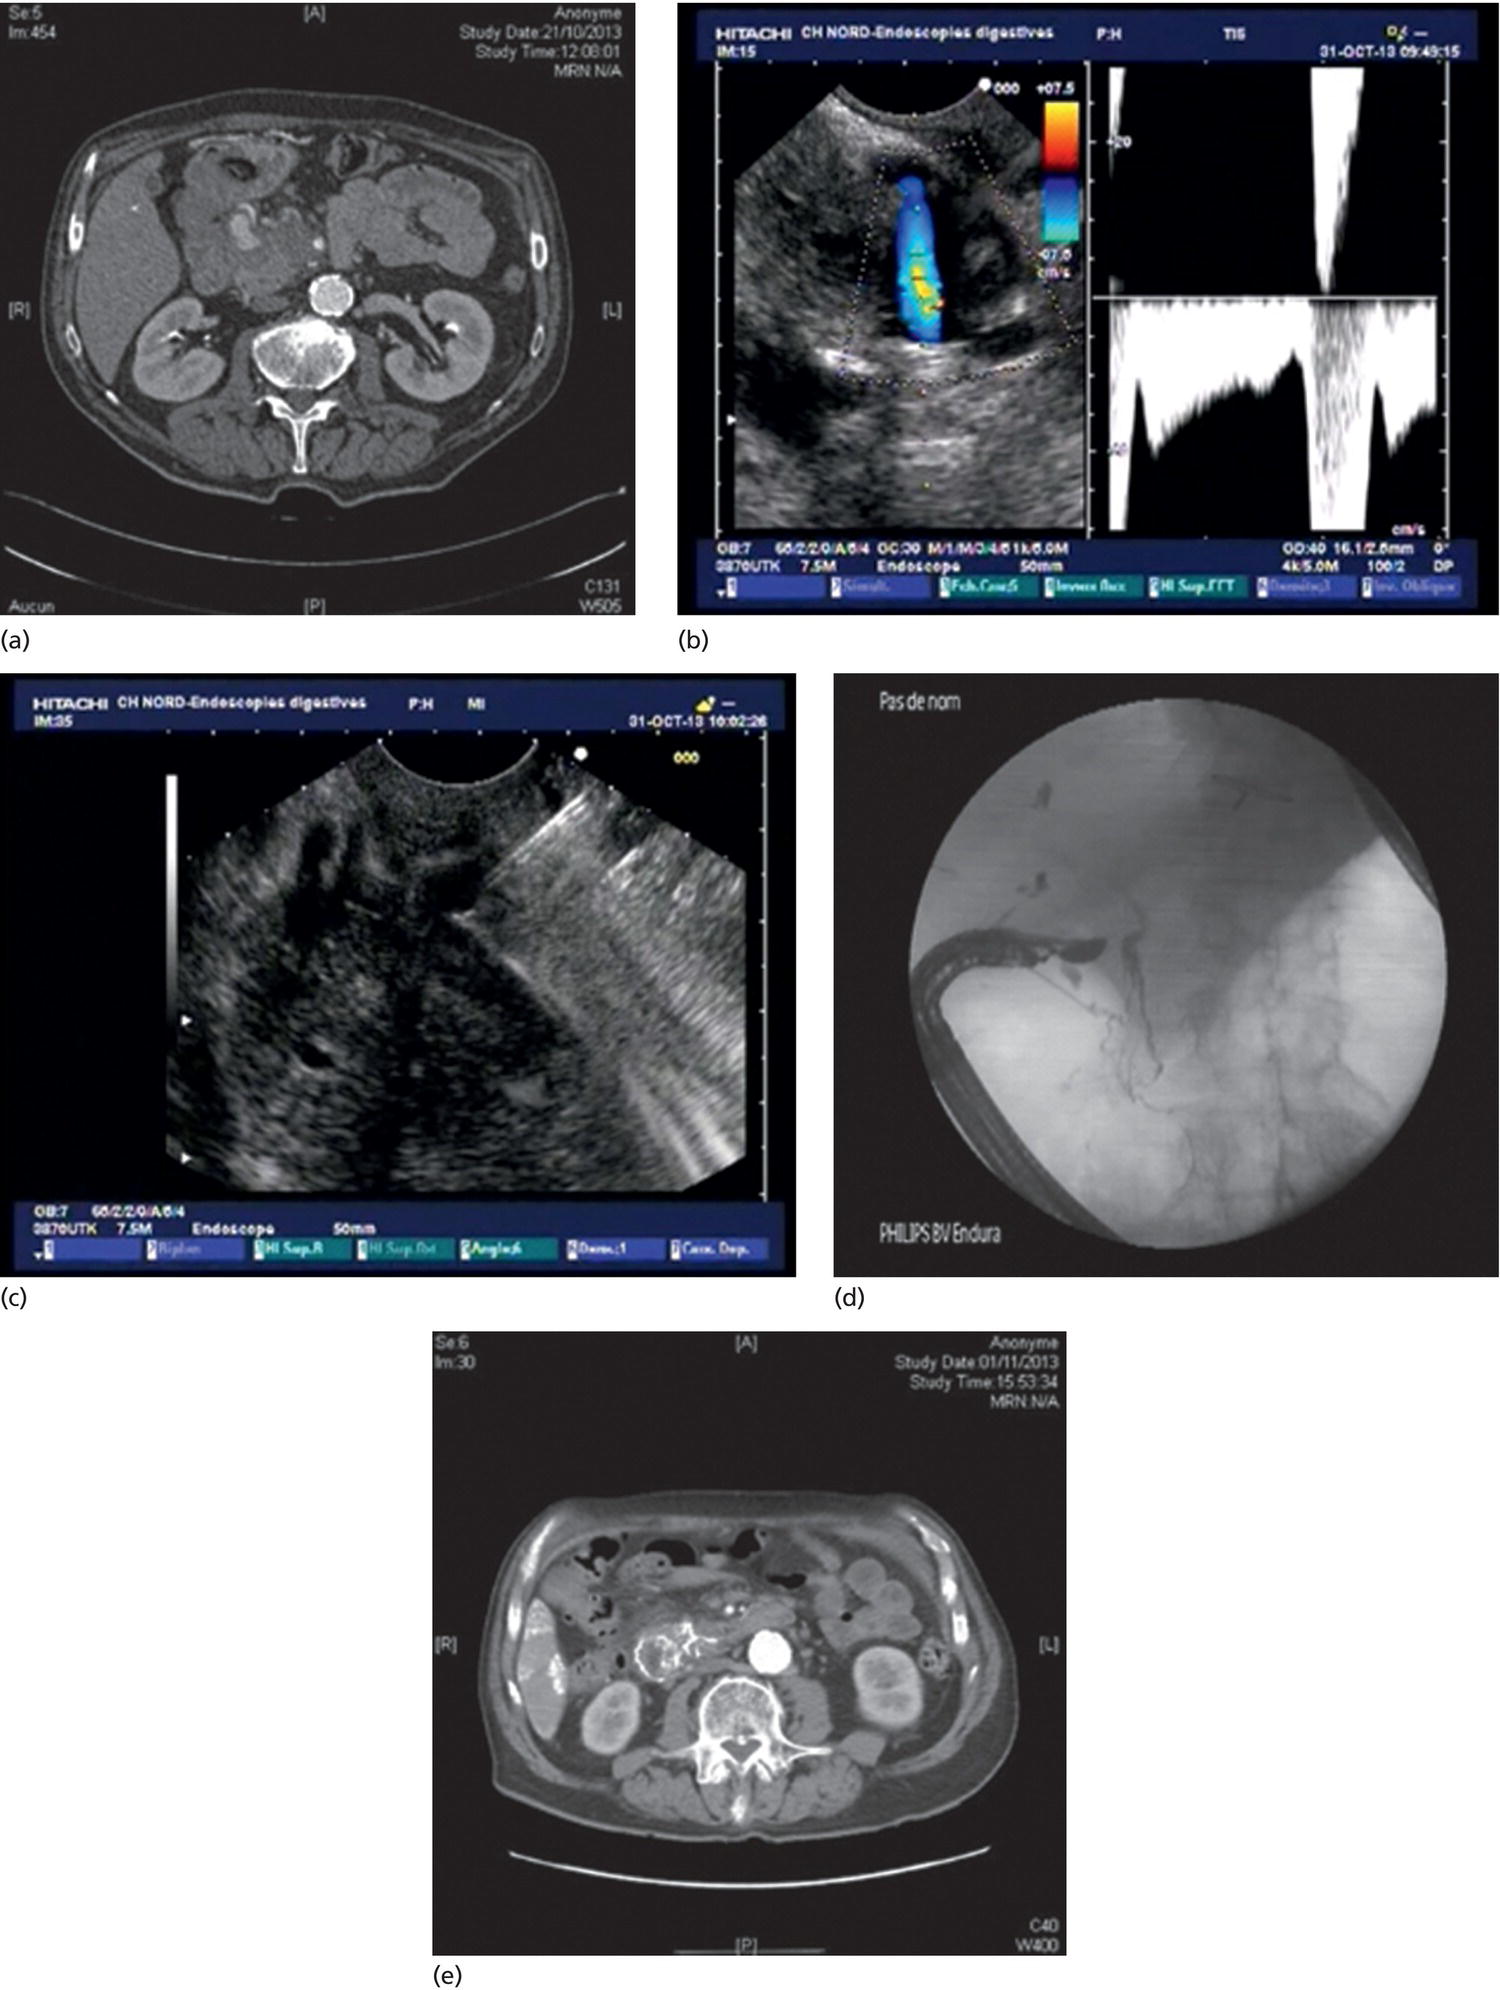 Photos depict patient 2 with bleeding pseudoaneurysm located to the pancreatic head.